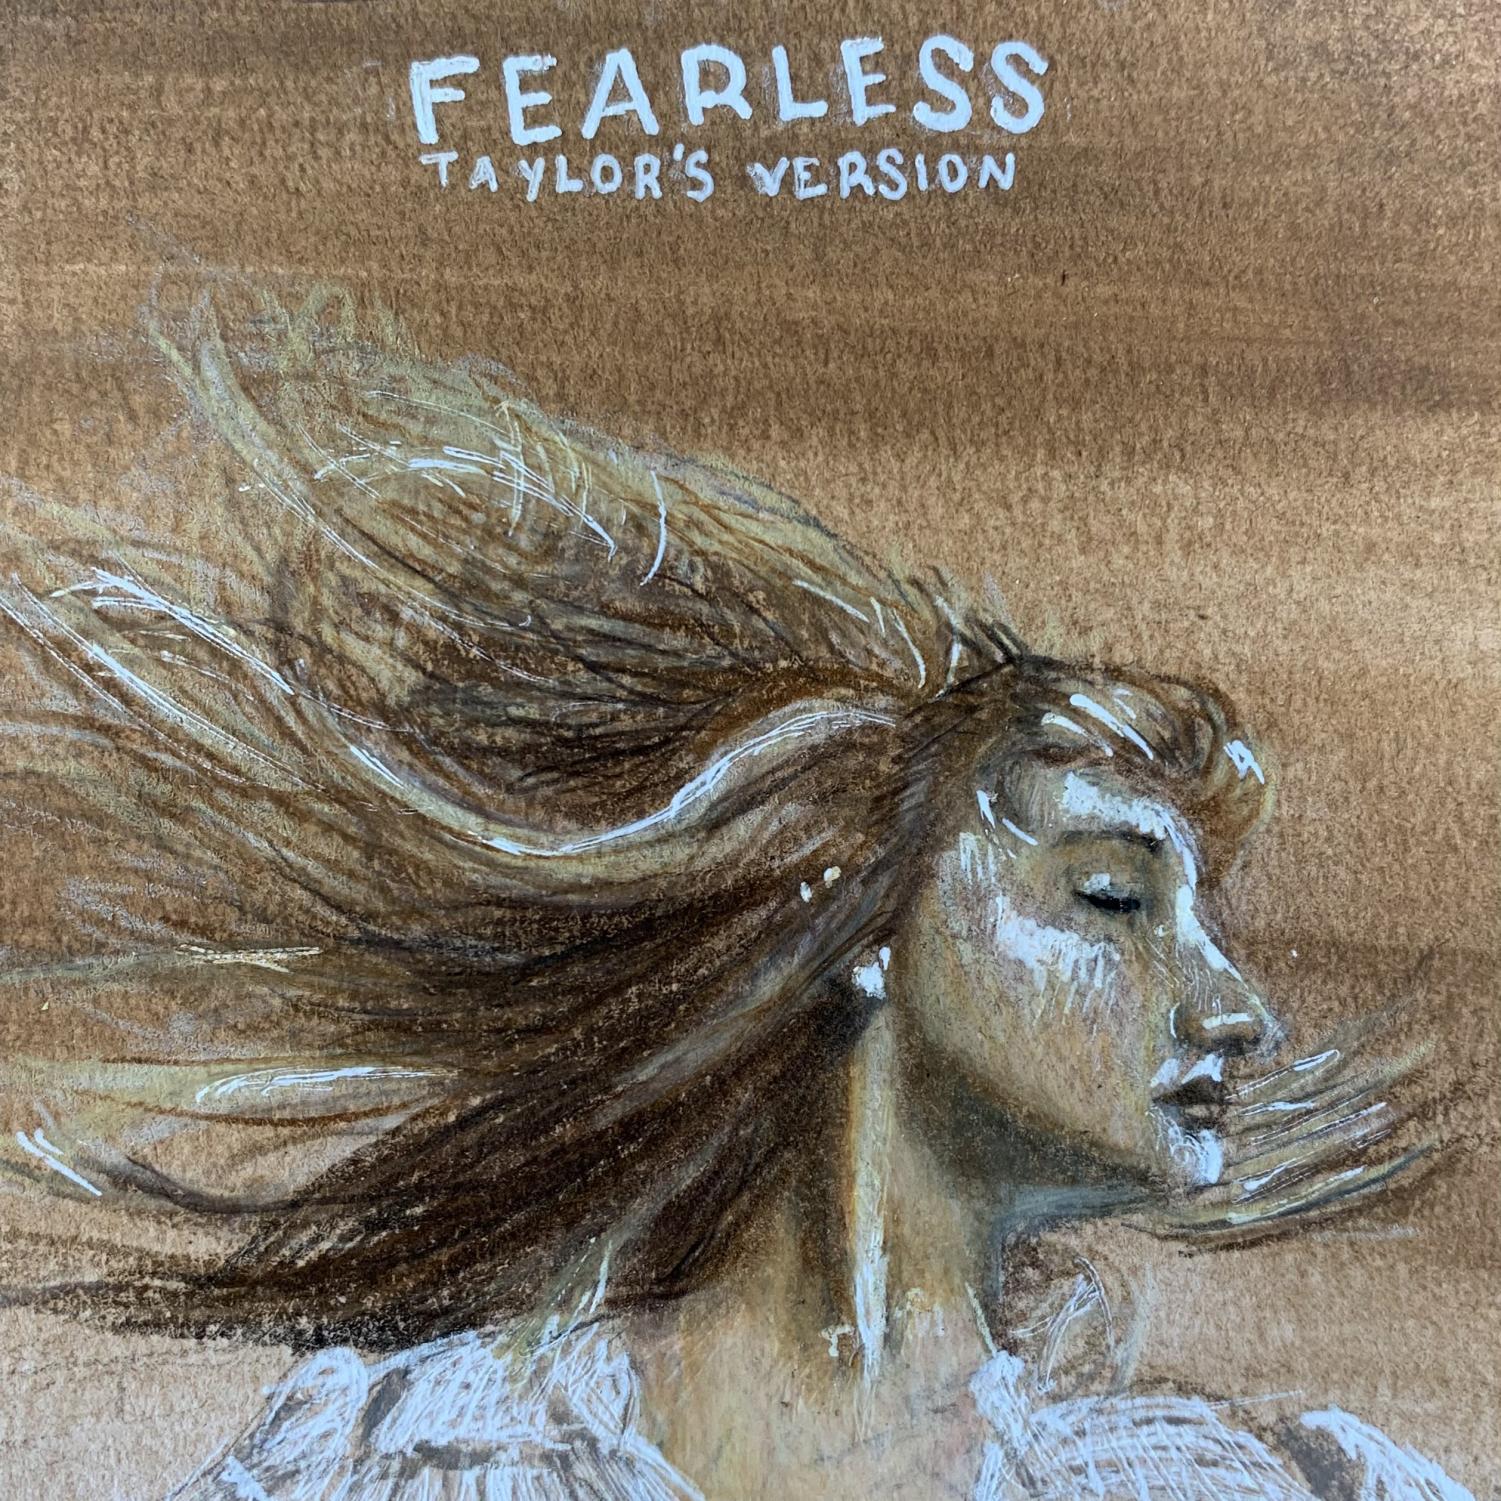 taylor swift fearless back album cover